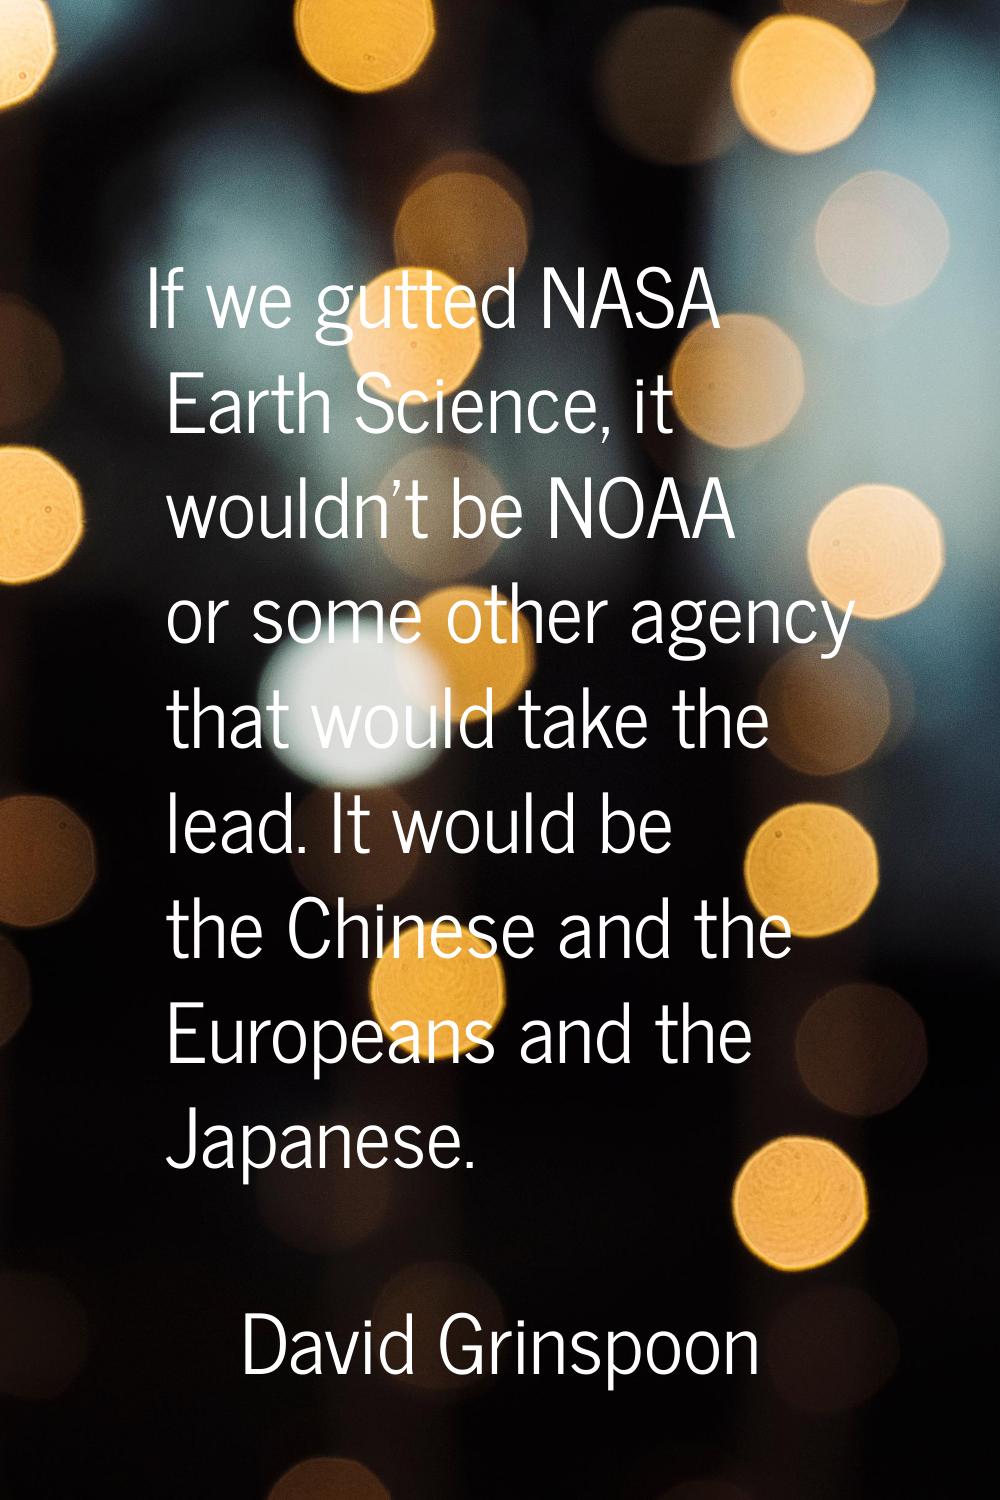 If we gutted NASA Earth Science, it wouldn't be NOAA or some other agency that would take the lead.